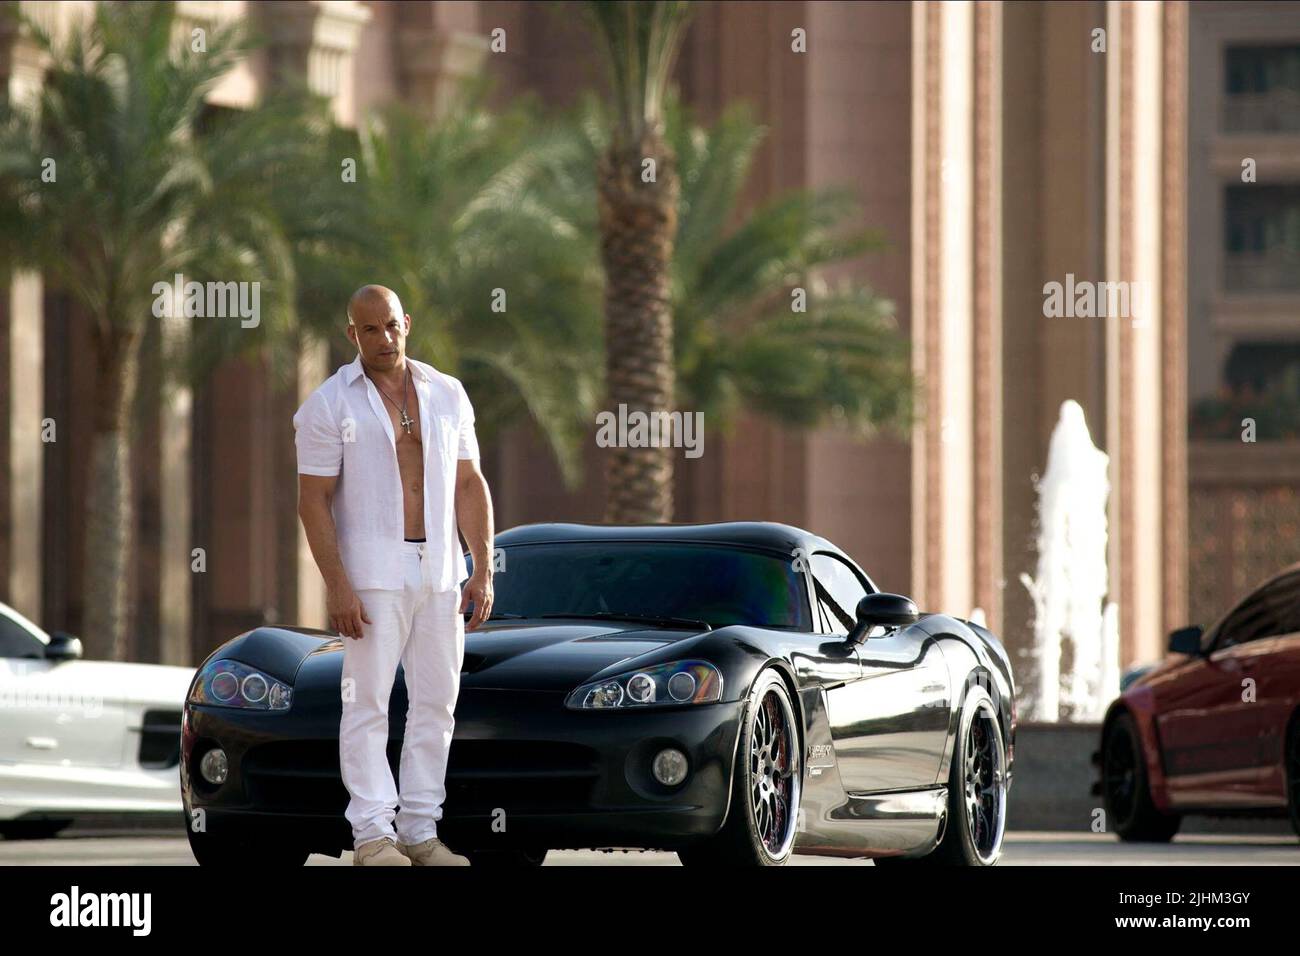 VIN DIESEL, Fast and Furious 7, 2015 Banque D'Images